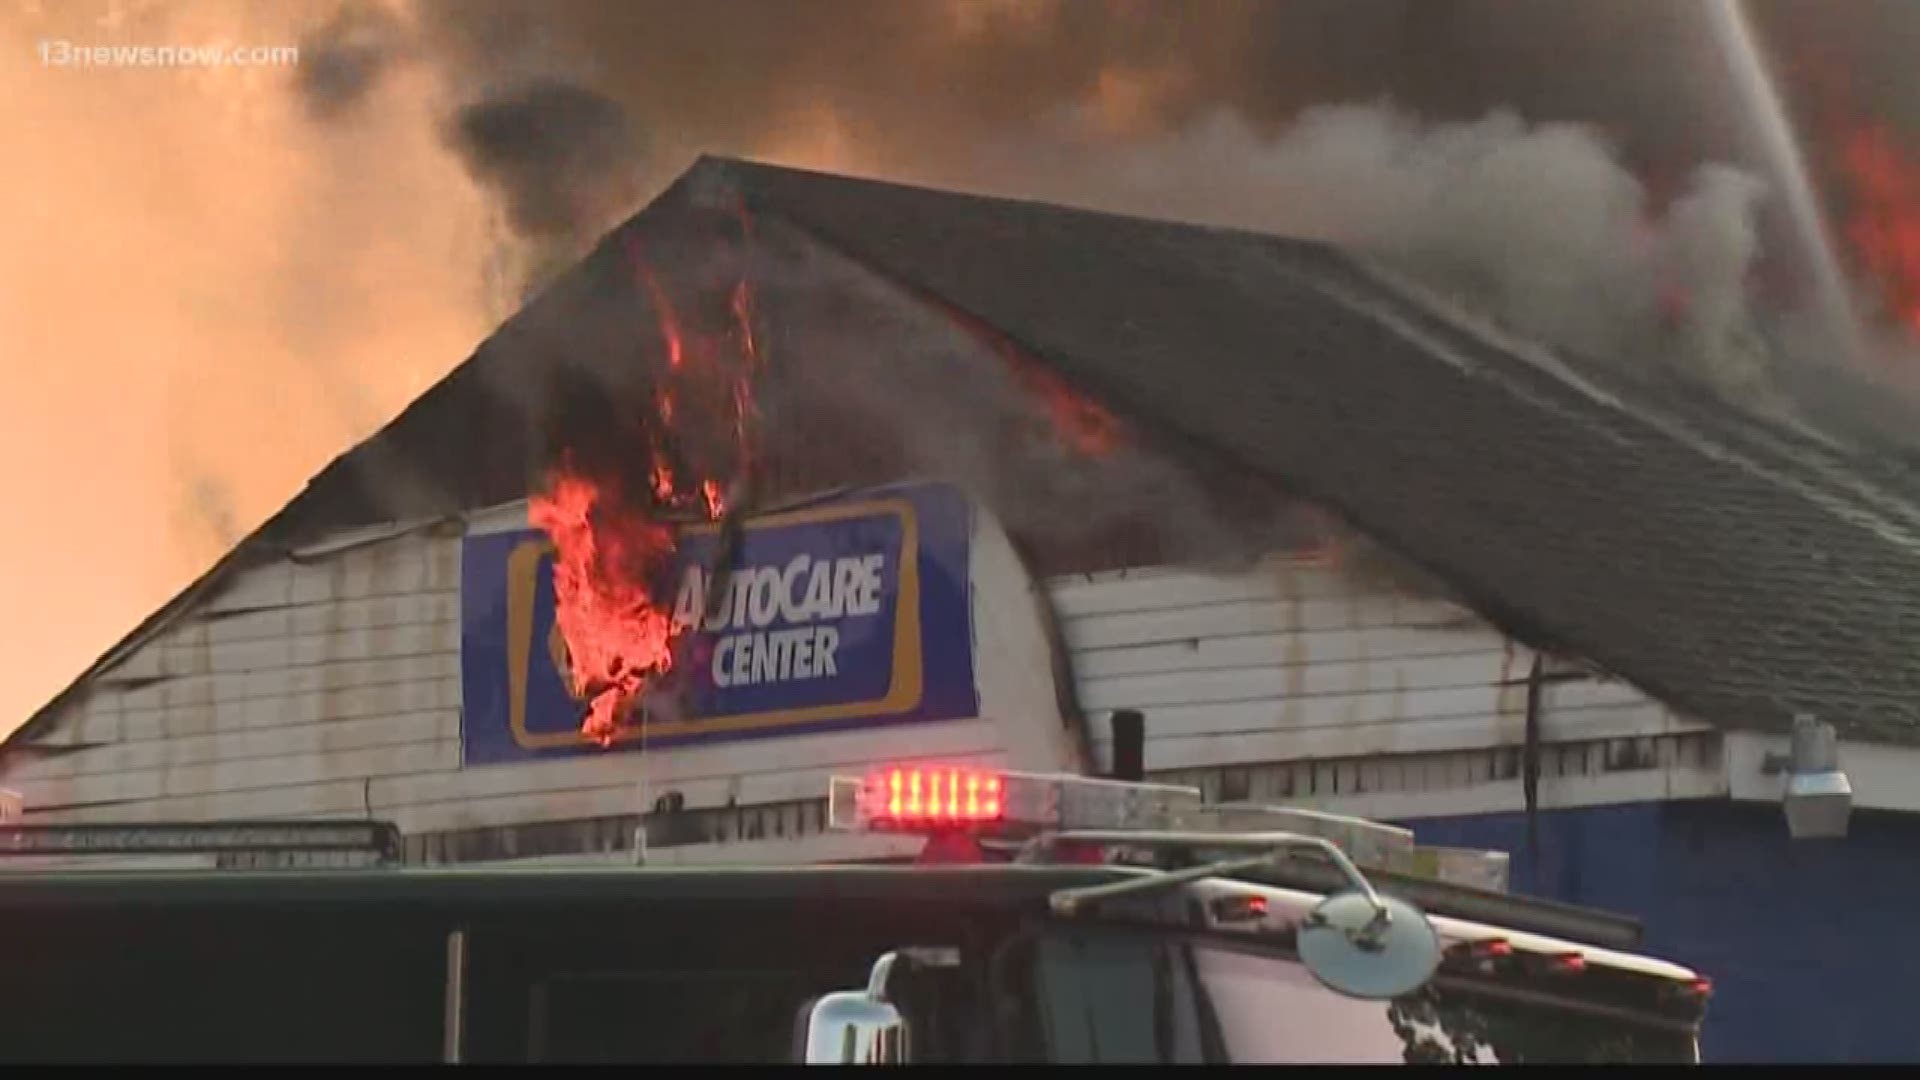 A fire burned through the roof of a NAPA AutoCare Center in Portsmouth on Tuesday morning.